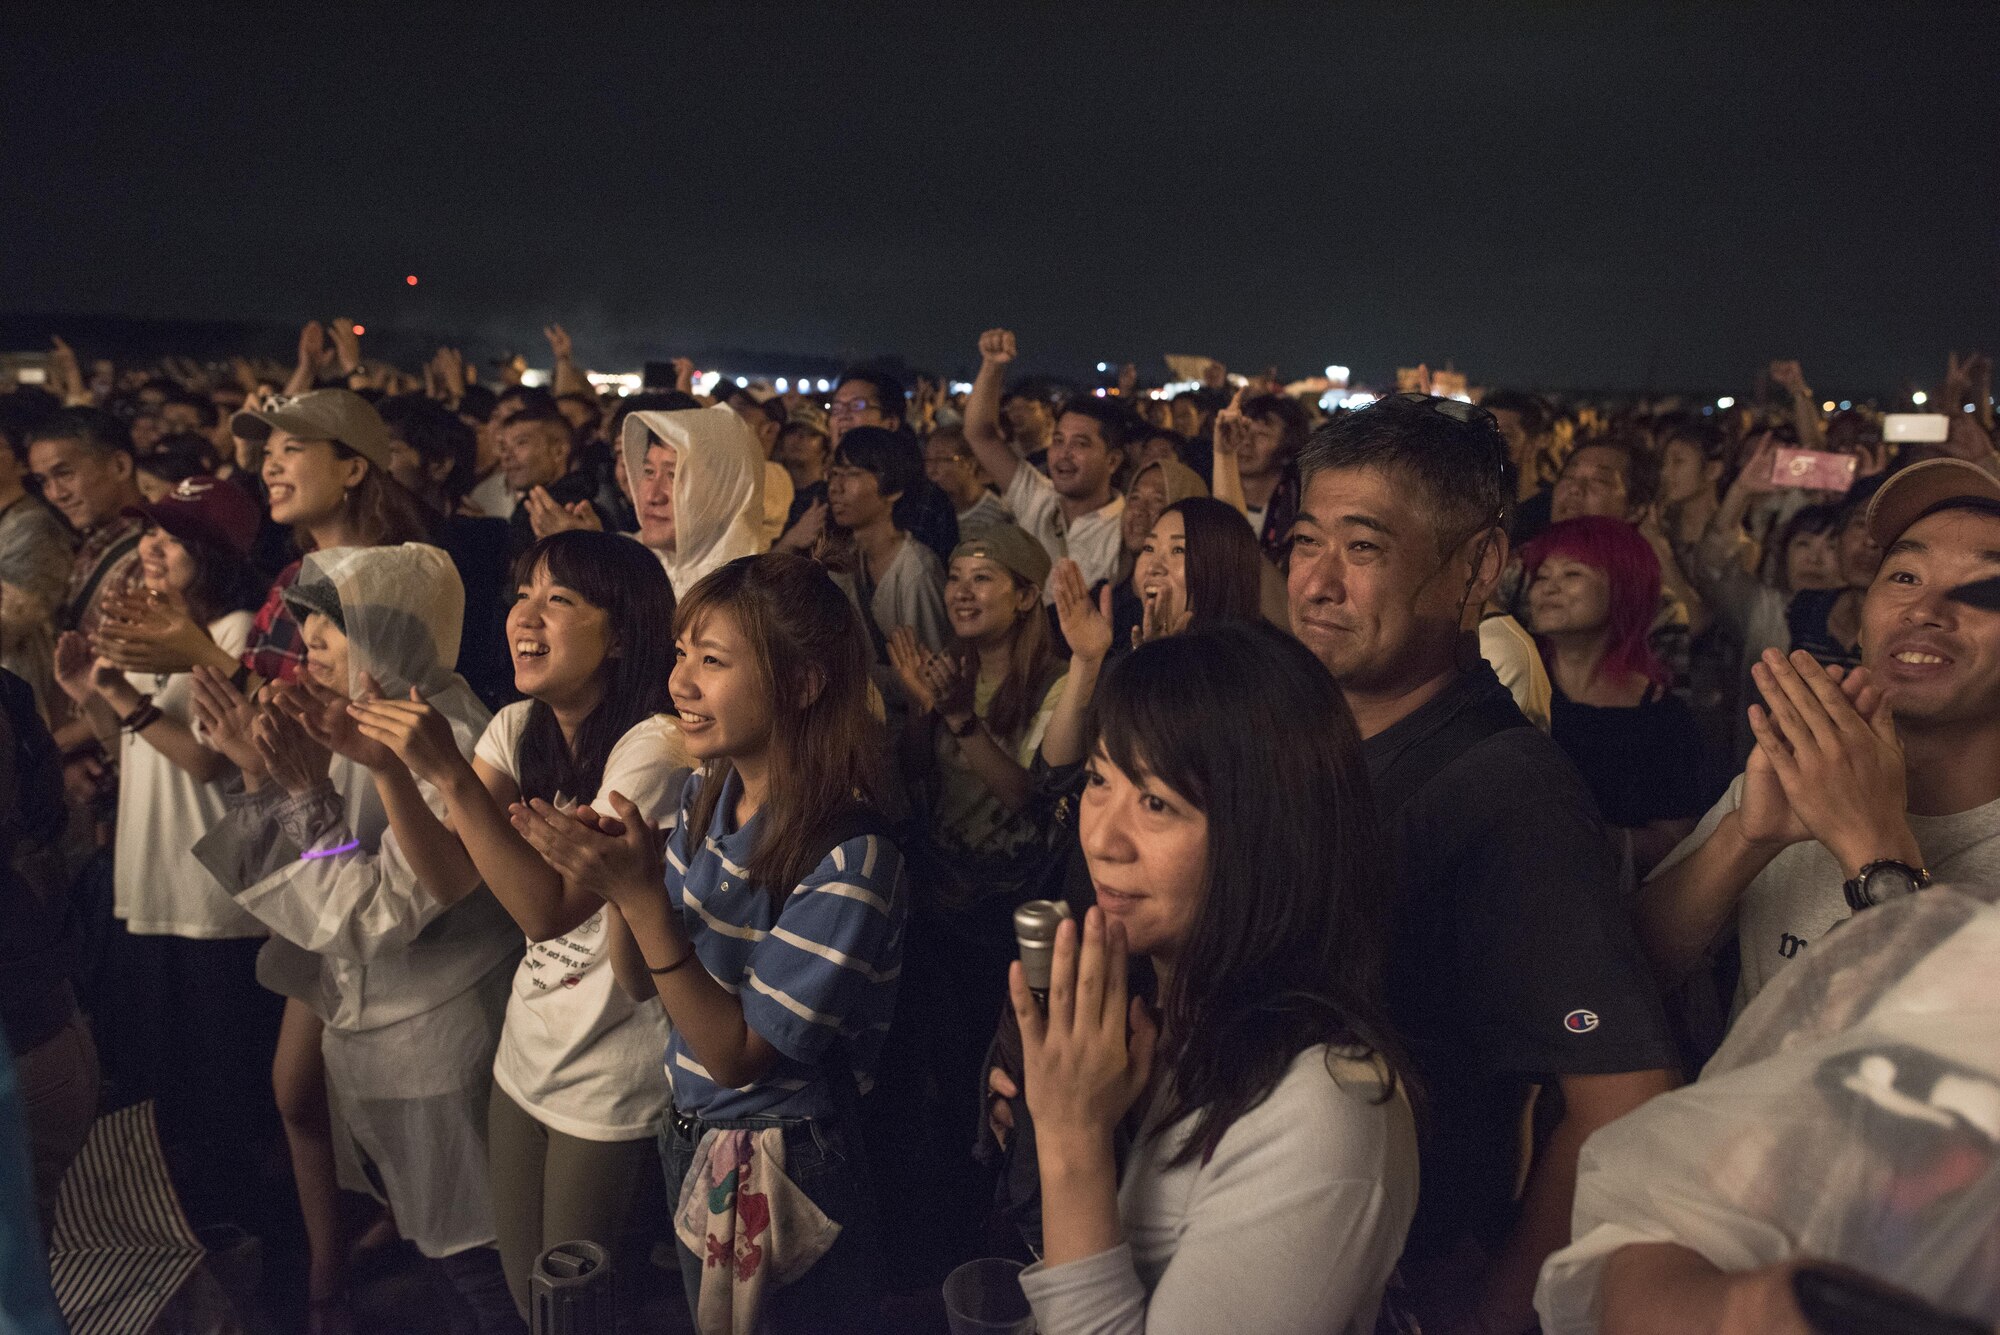 The audience claps and dances to a performance by the Band of the Pacific-Asia during the 2016 Japanese-American Friendship Festival at Yokota Air Base, Japan, Sept. 17, 2016. Tens of thousands of people attend the festival every year to learn more about the US military and American culture and to enjoy performances and demonstrations. More than 185,000 people attended the festival in 2015. (U.S. Air Force photo by Staff Sgt. Cody H. Ramirez/Released)